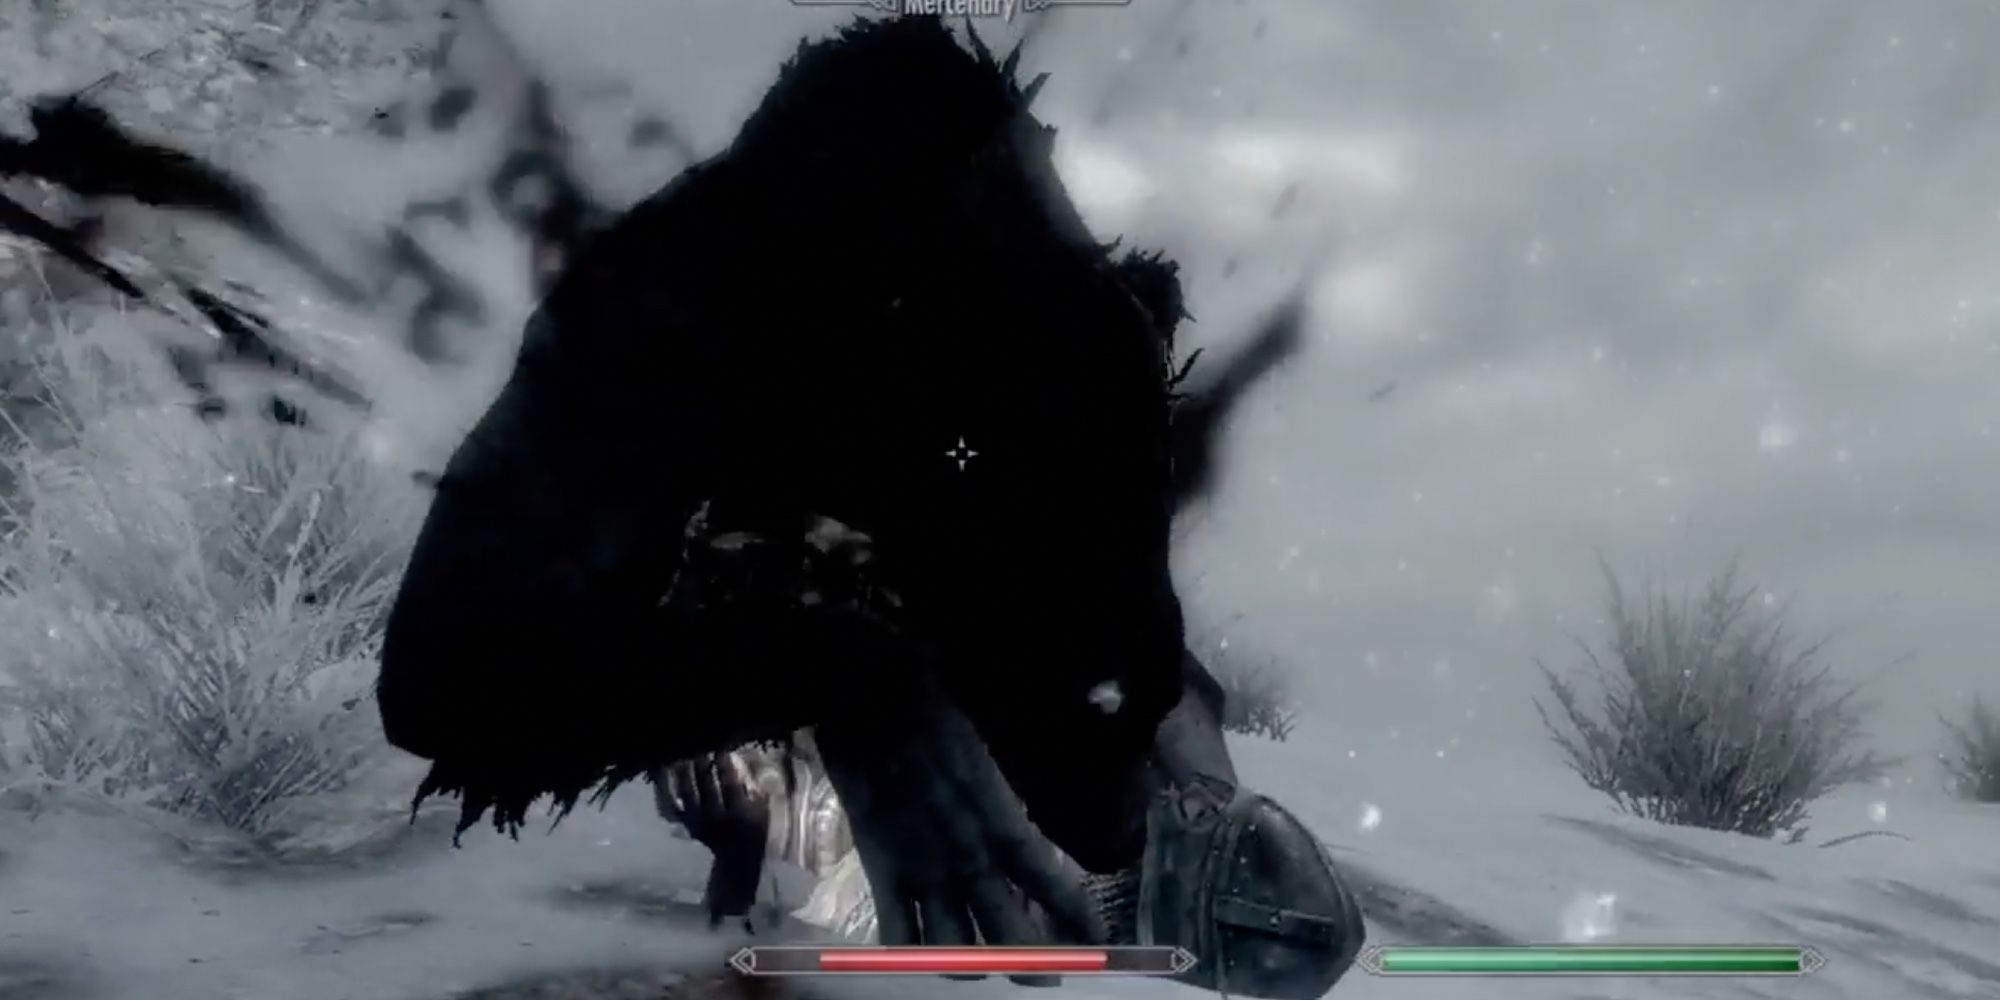 Player bites into a monster in the forest as a Werewolf